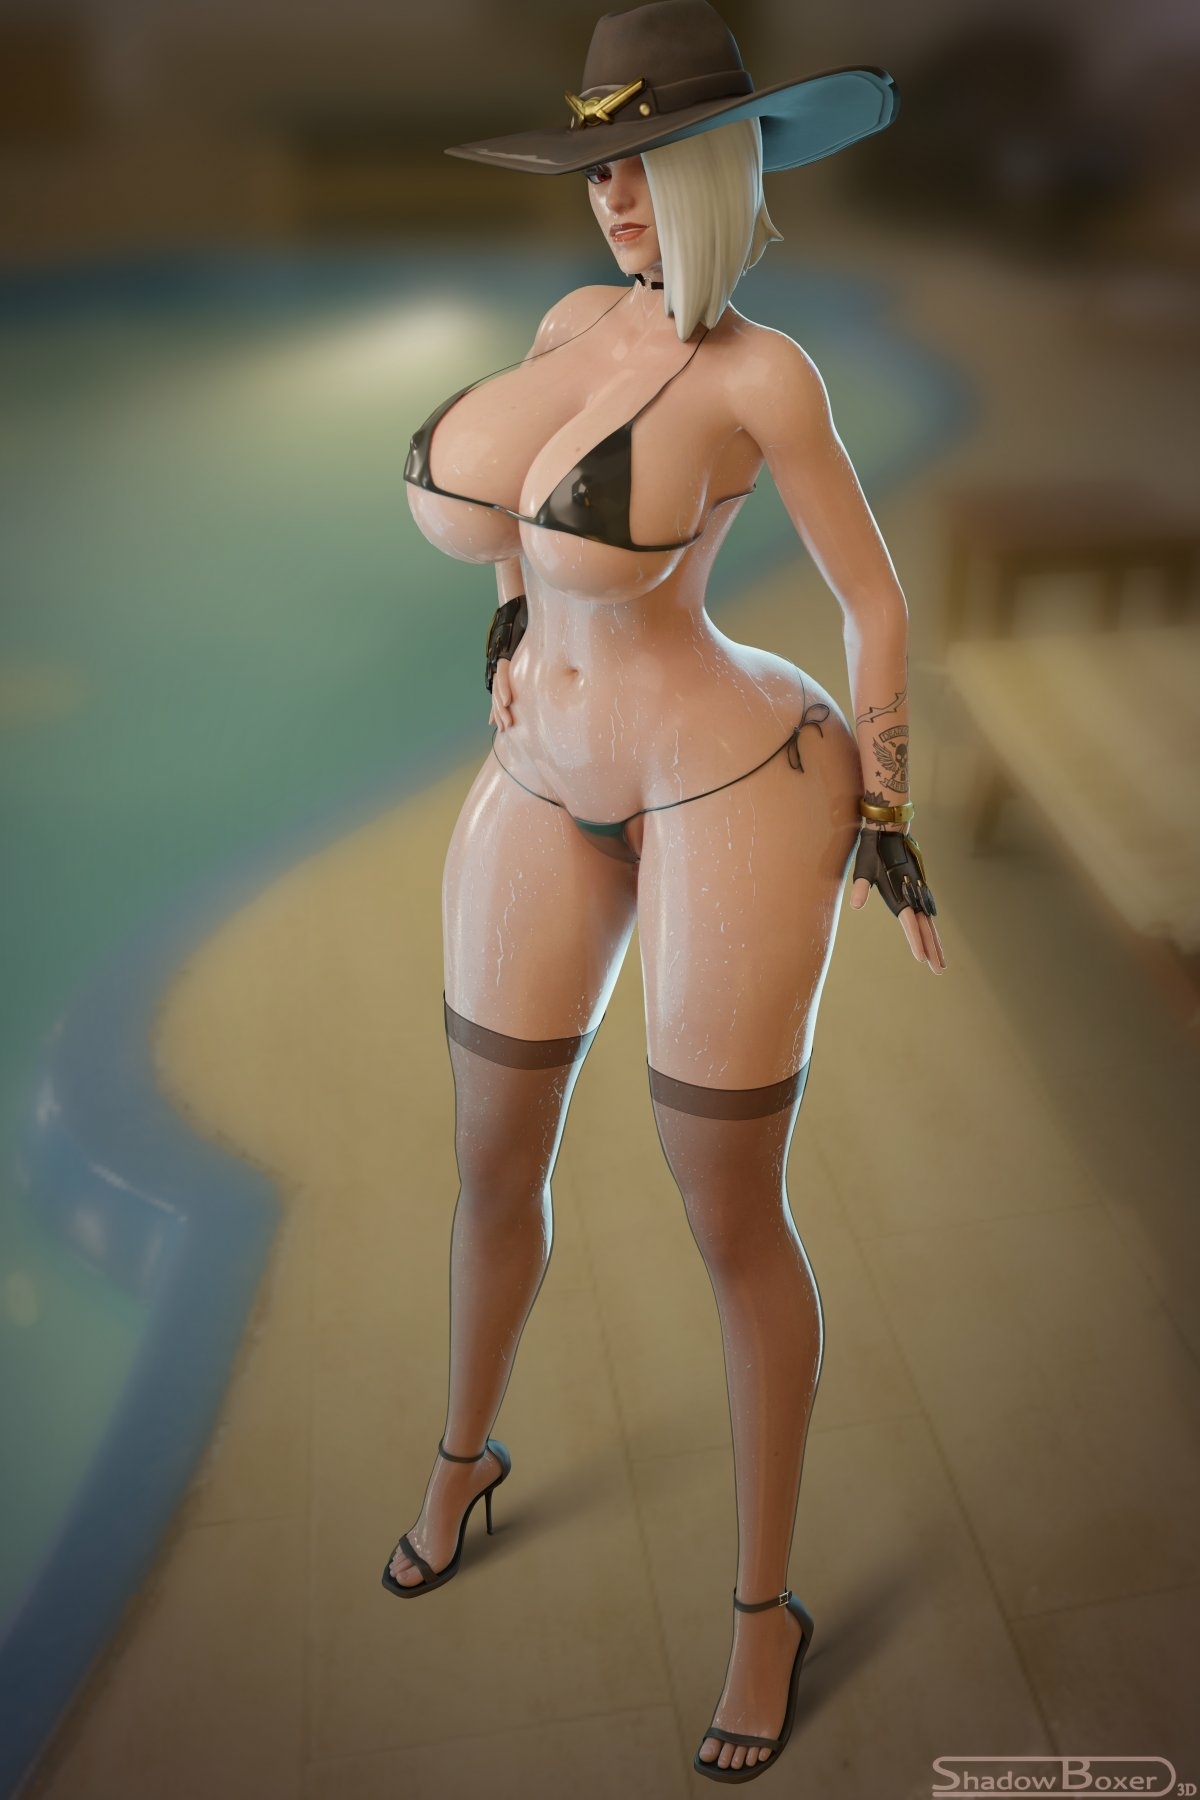 Ashe at the pool Ashe Overwatch Menat Street Fighter Pussy Nipples Boobs Big boobs Cake Ass Big Ass Big Tits Tits Sexy Horny Face Horny 3d Porn